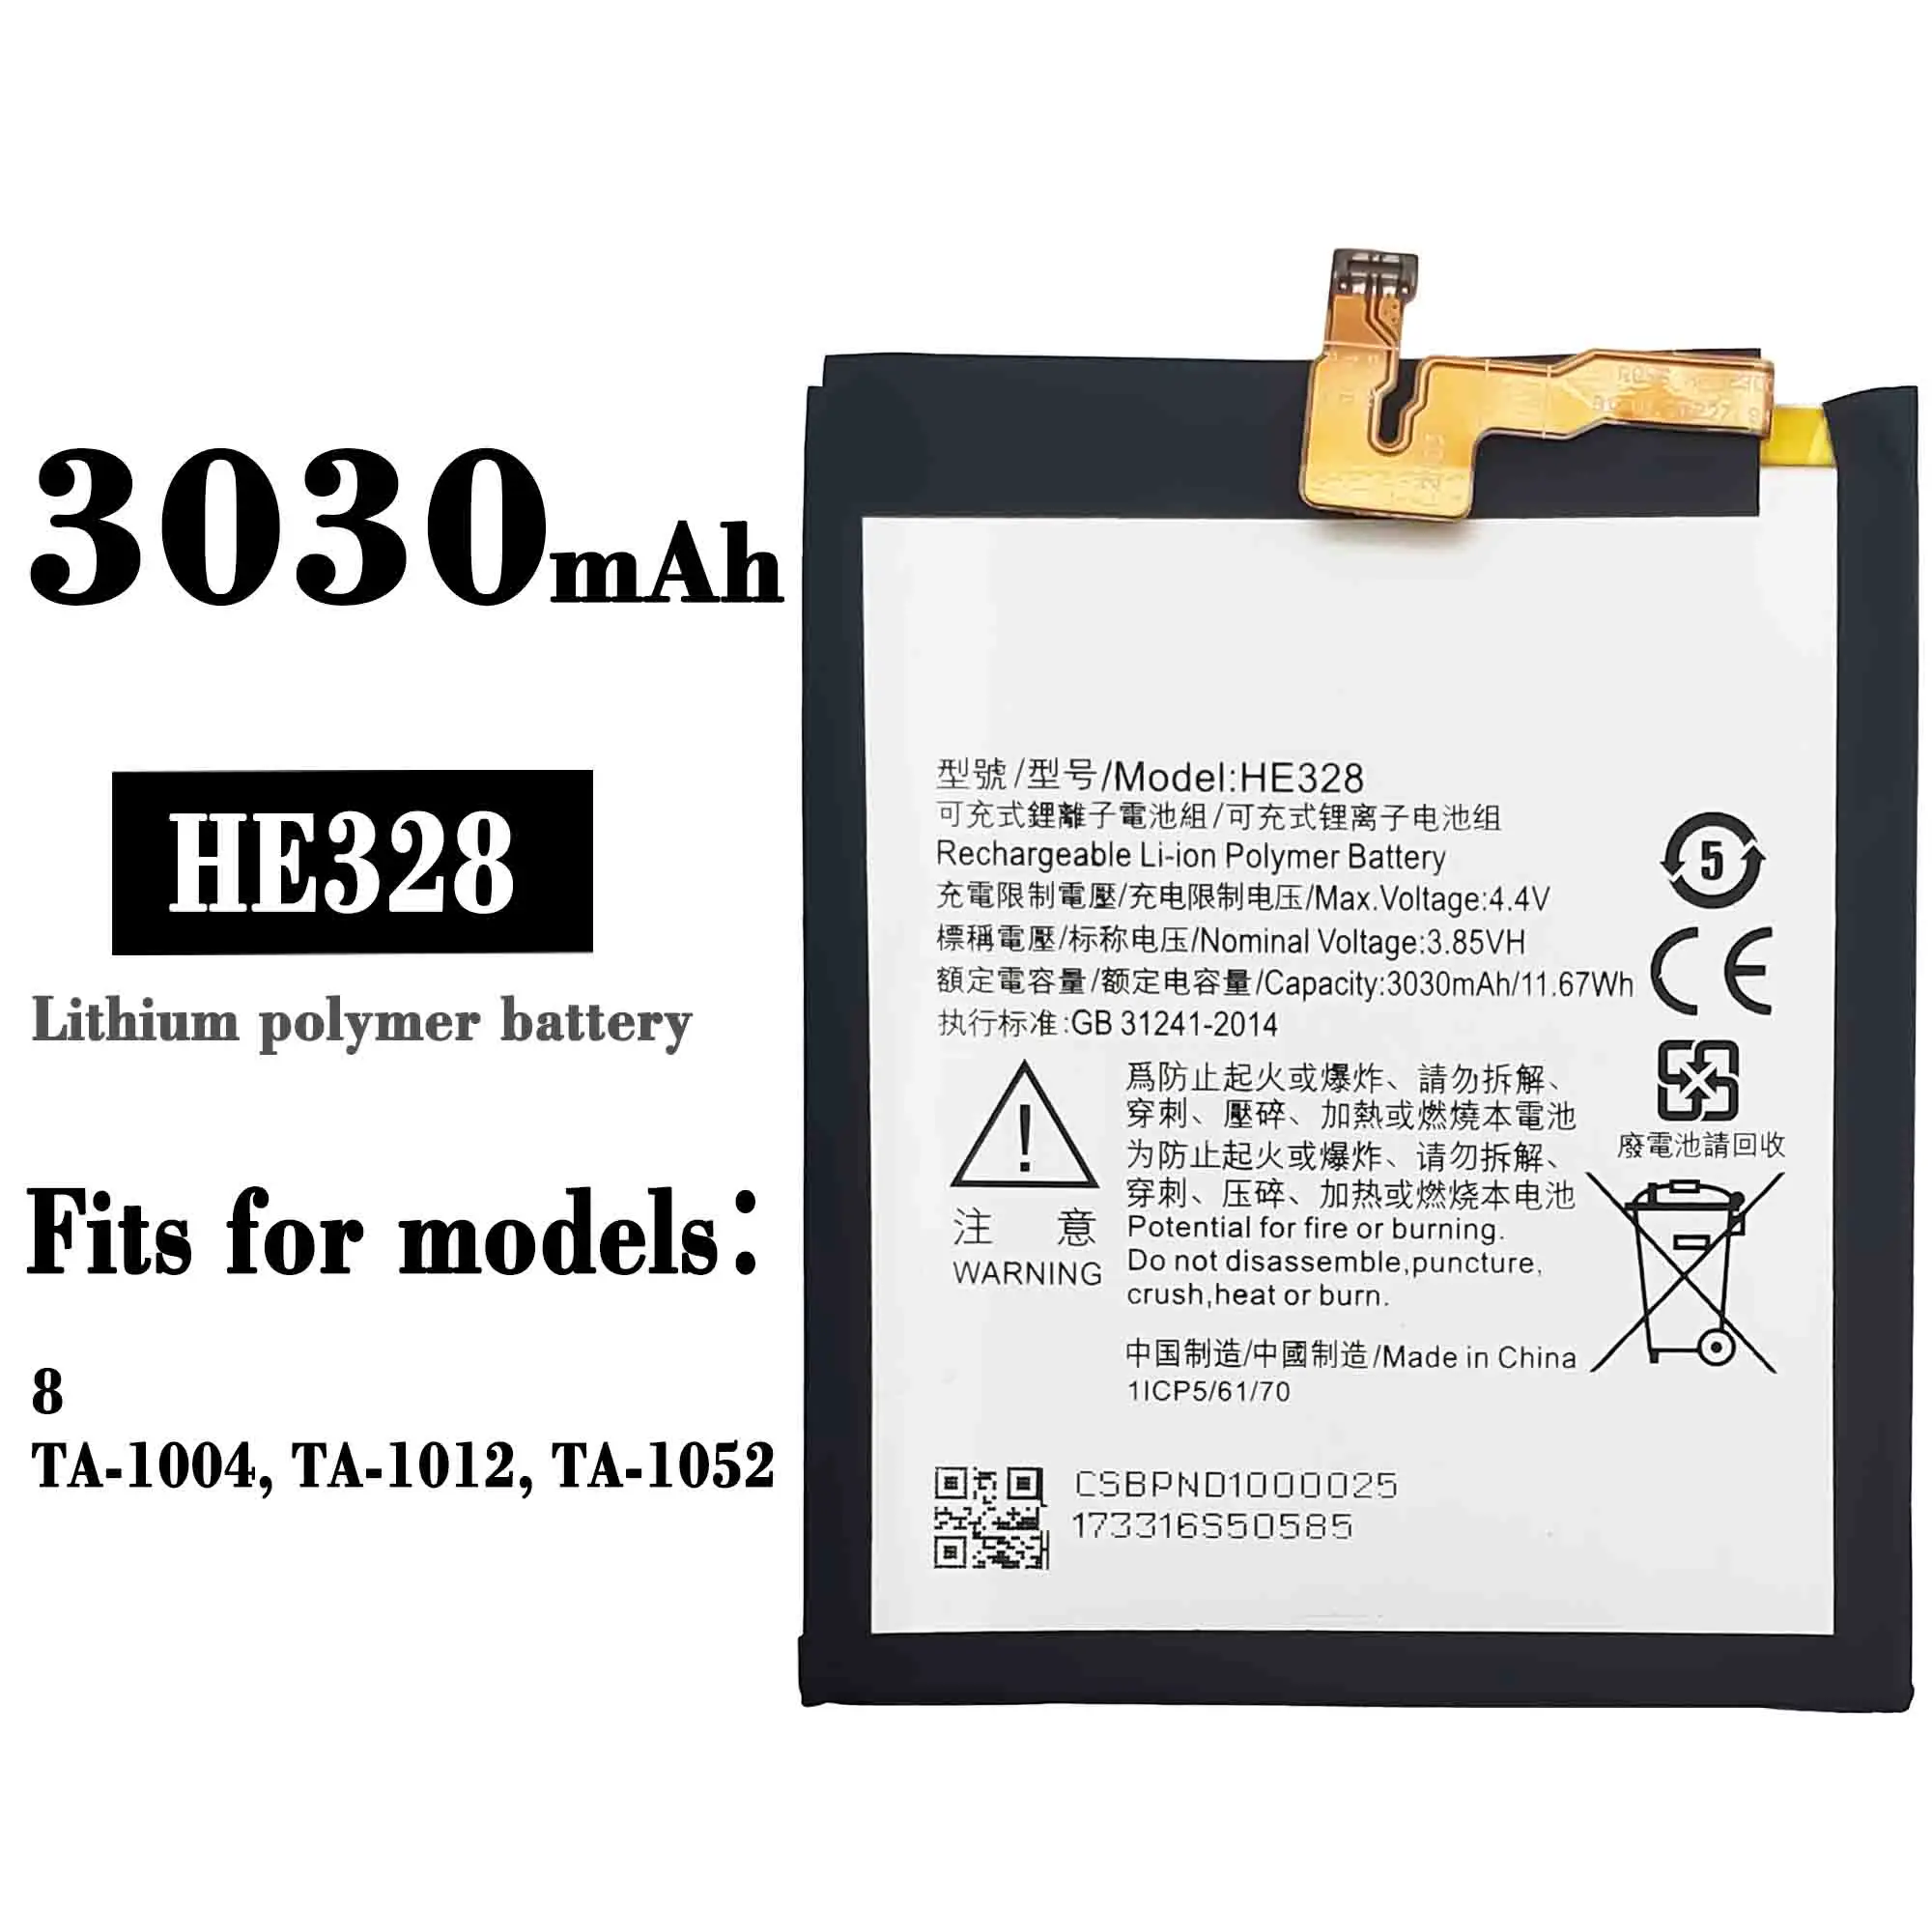 

100% Original HE328 3030mAh Battery For Nokia 8 N8 TA-1004 New High Quality +Tracking number